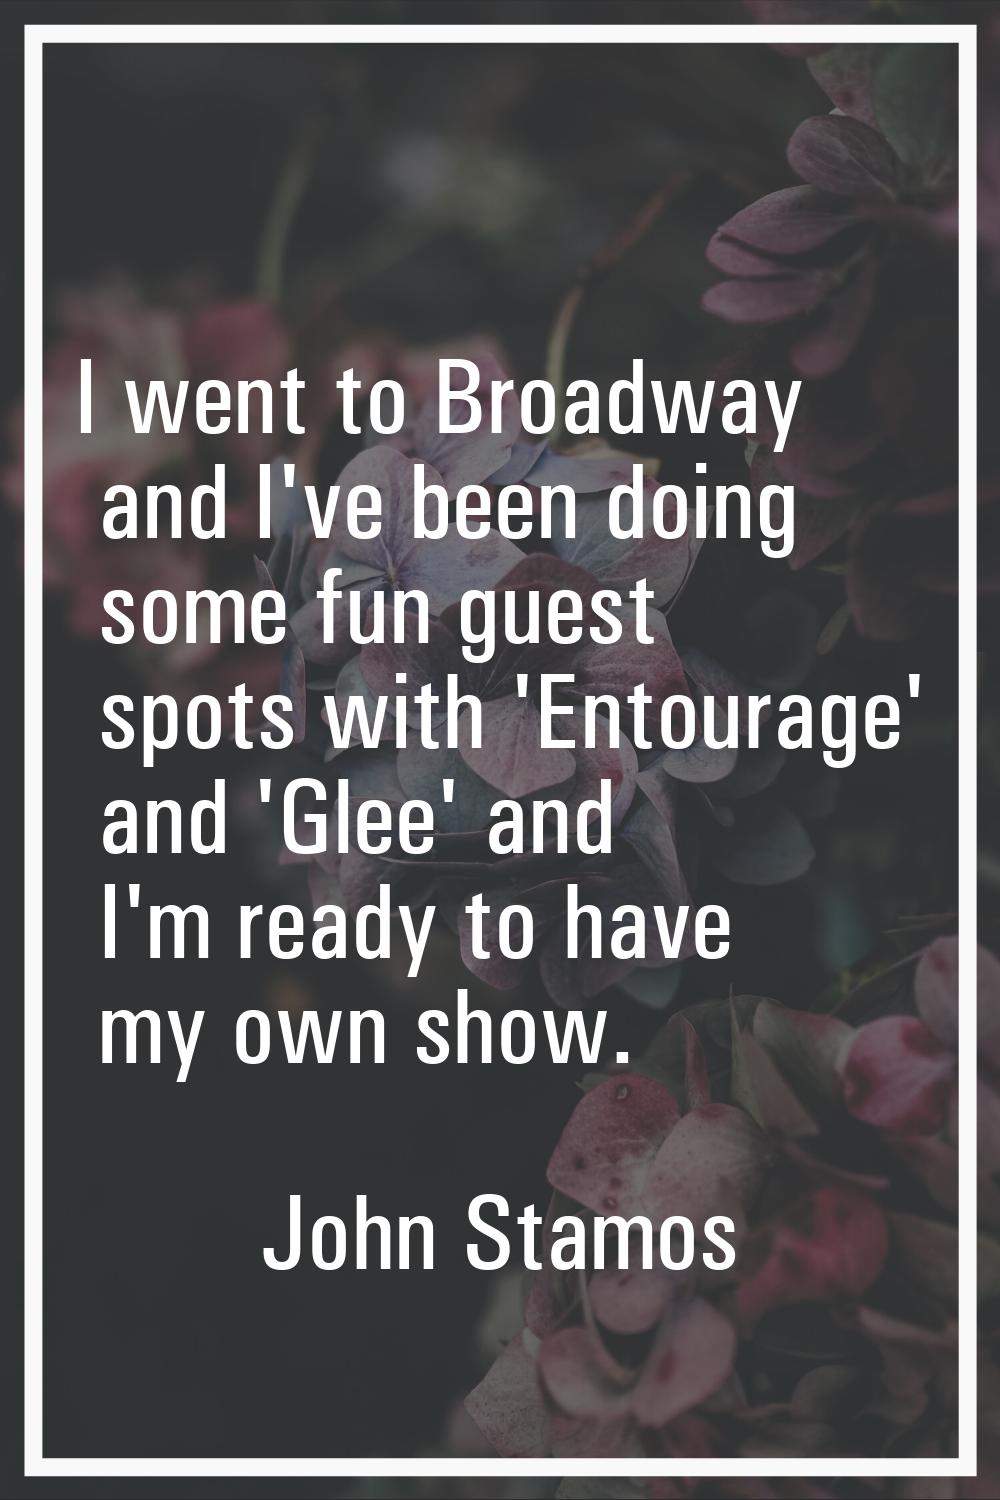 I went to Broadway and I've been doing some fun guest spots with 'Entourage' and 'Glee' and I'm rea